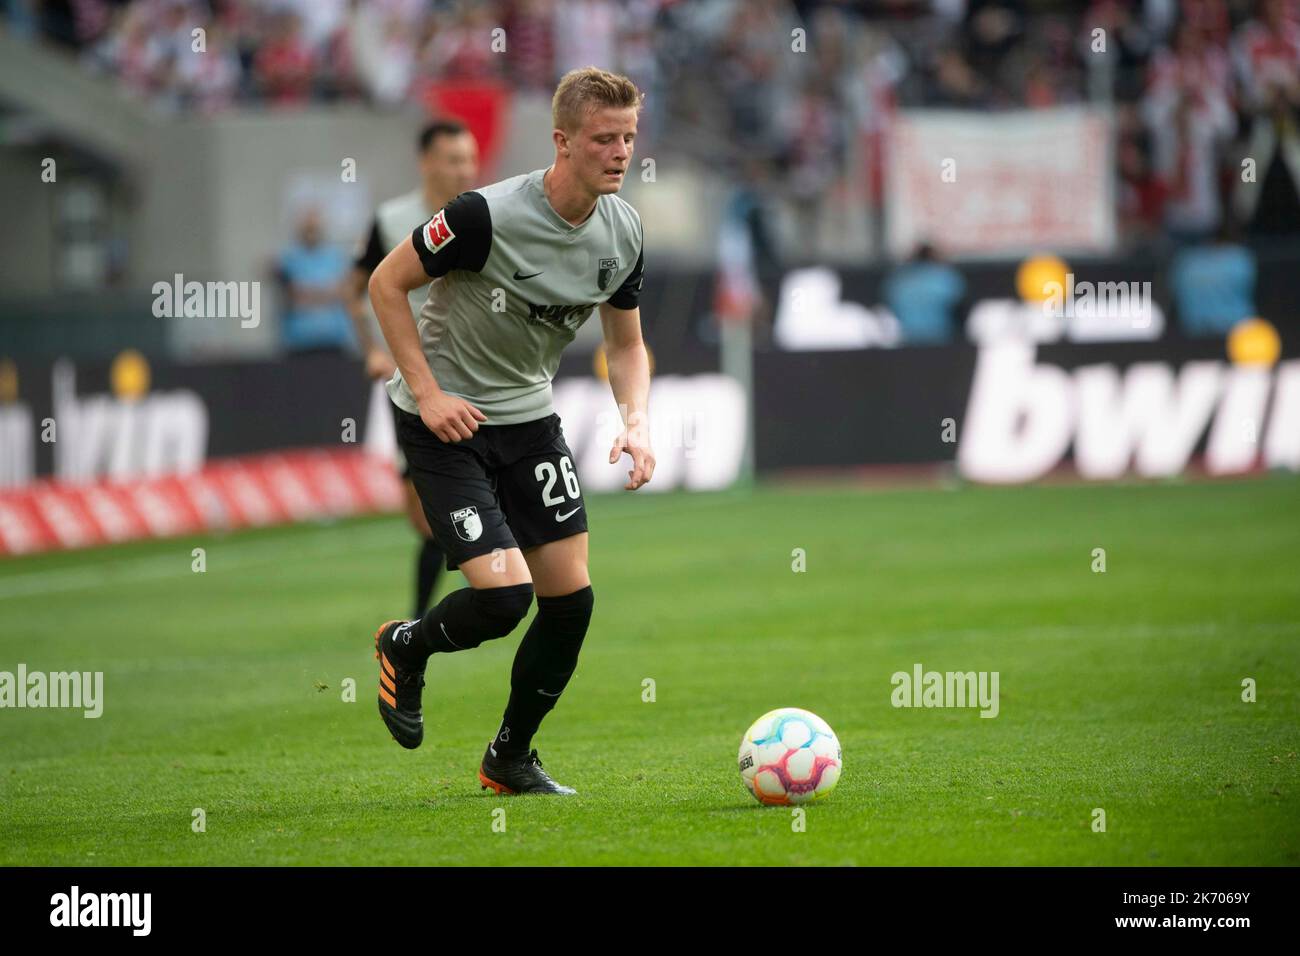 Frederik WINTHER (A), action, single action, soccer 1st Bundesliga, 10th matchday, FC Cologne (K) - FC Augsburg (A) 3: 2 on October 16th, 2022 in Koeln/ Germany. #DFL regulations prohibit any use of photographs as image sequences and/or quasi-video # © Stock Photo